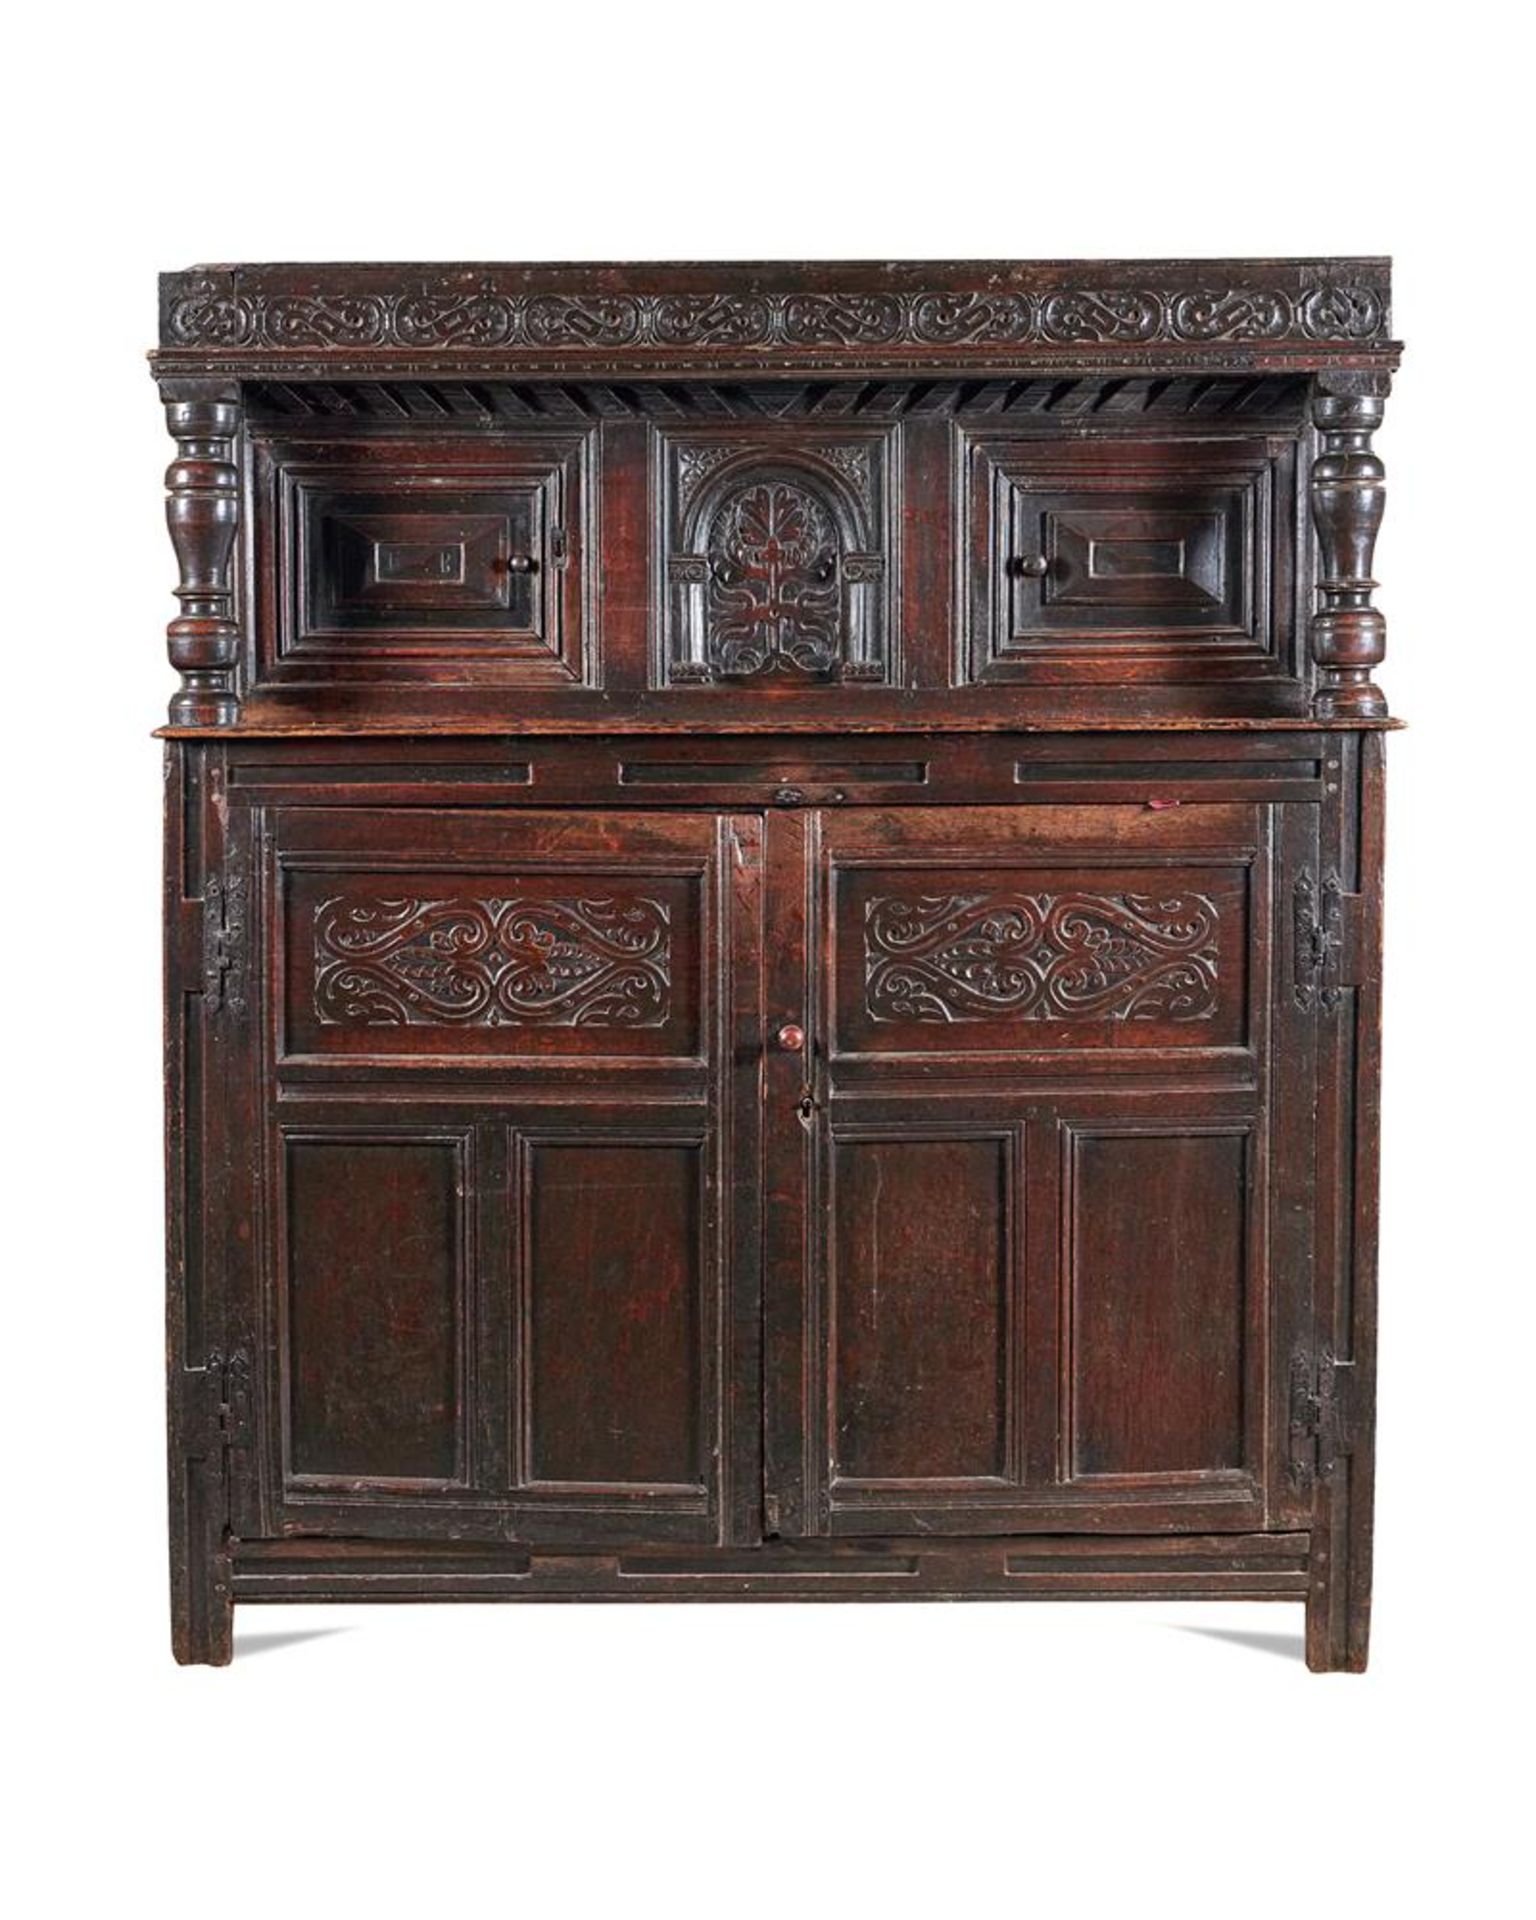 A WILLIAM AND MARY OAK COURT CUPBOARD, SECOND HALF 17TH CENTURY